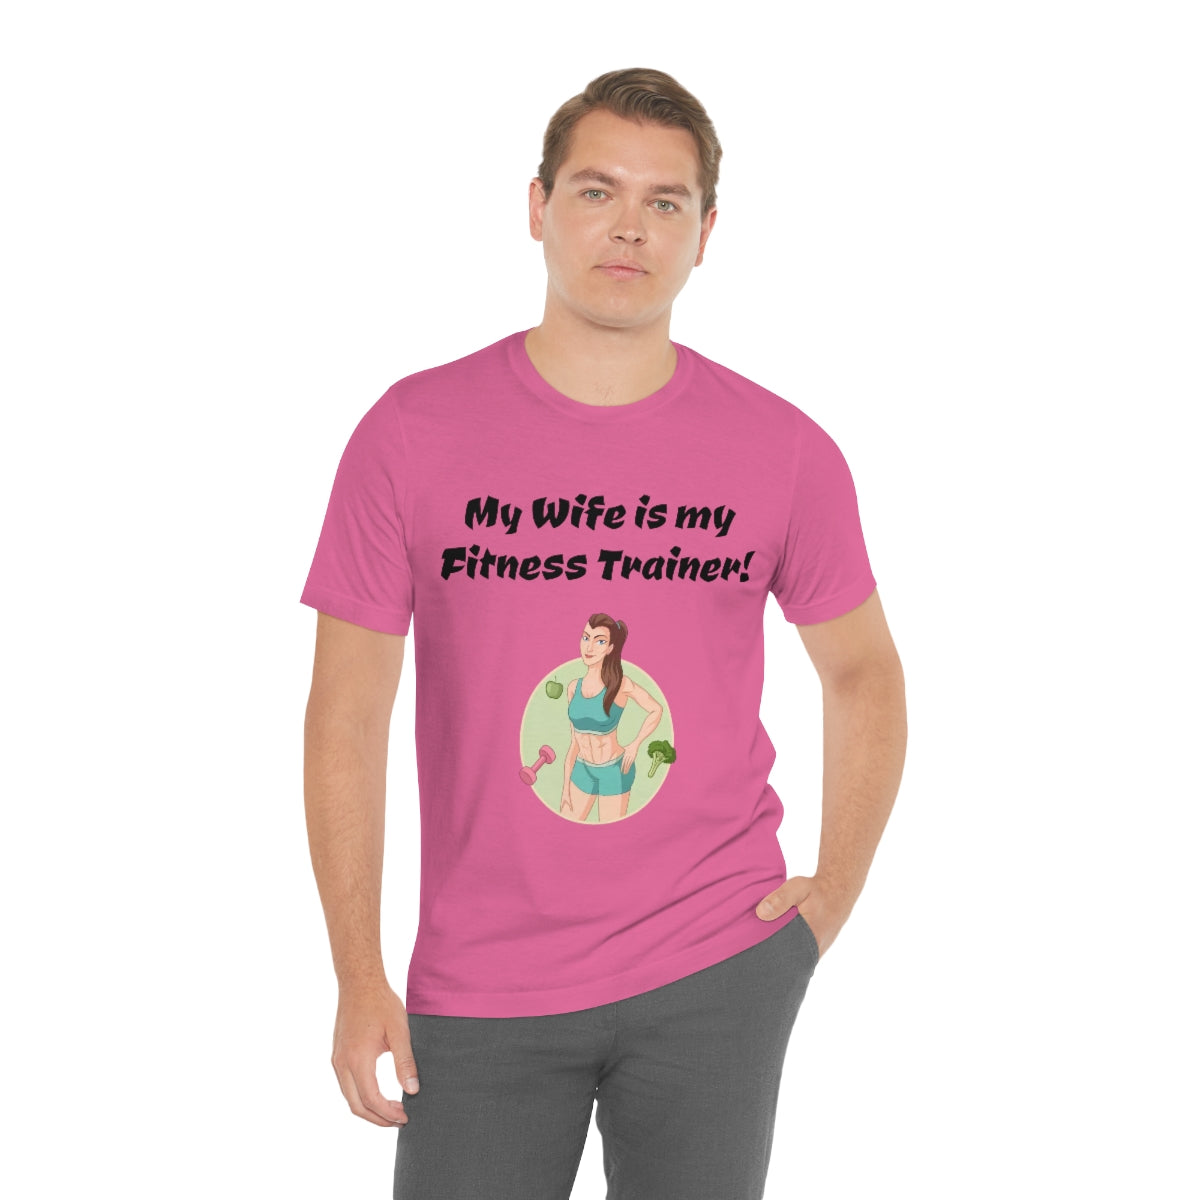 My wife is my fitness trainer - Funny Unisex Short Sleeve Tee - CrazyTomTShirts